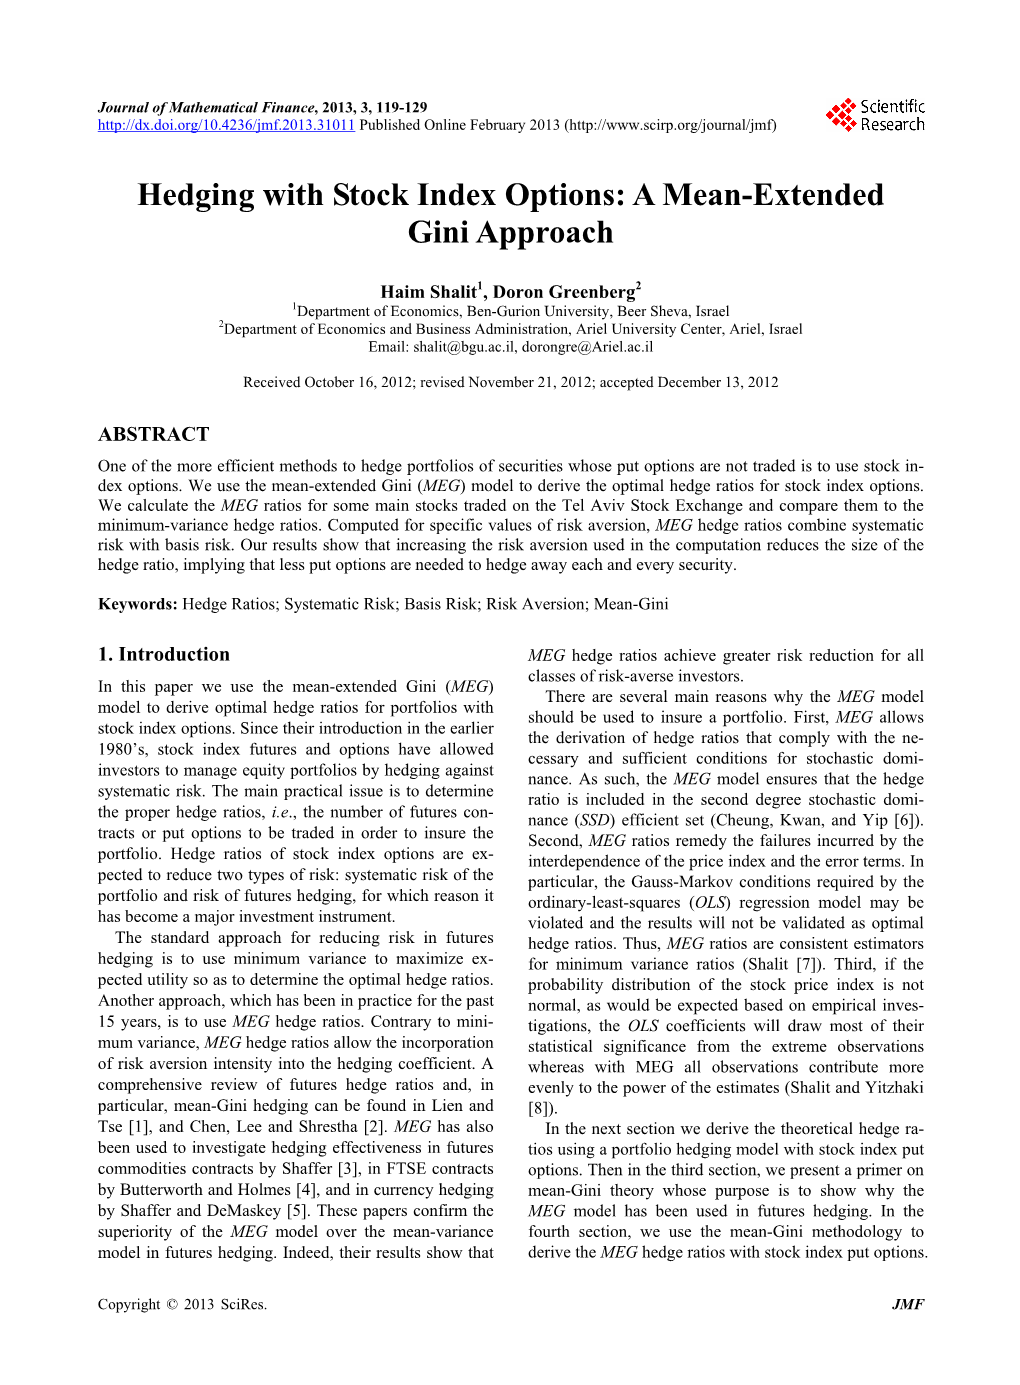 Hedging with Stock Index Options: a Mean-Extended Gini Approach